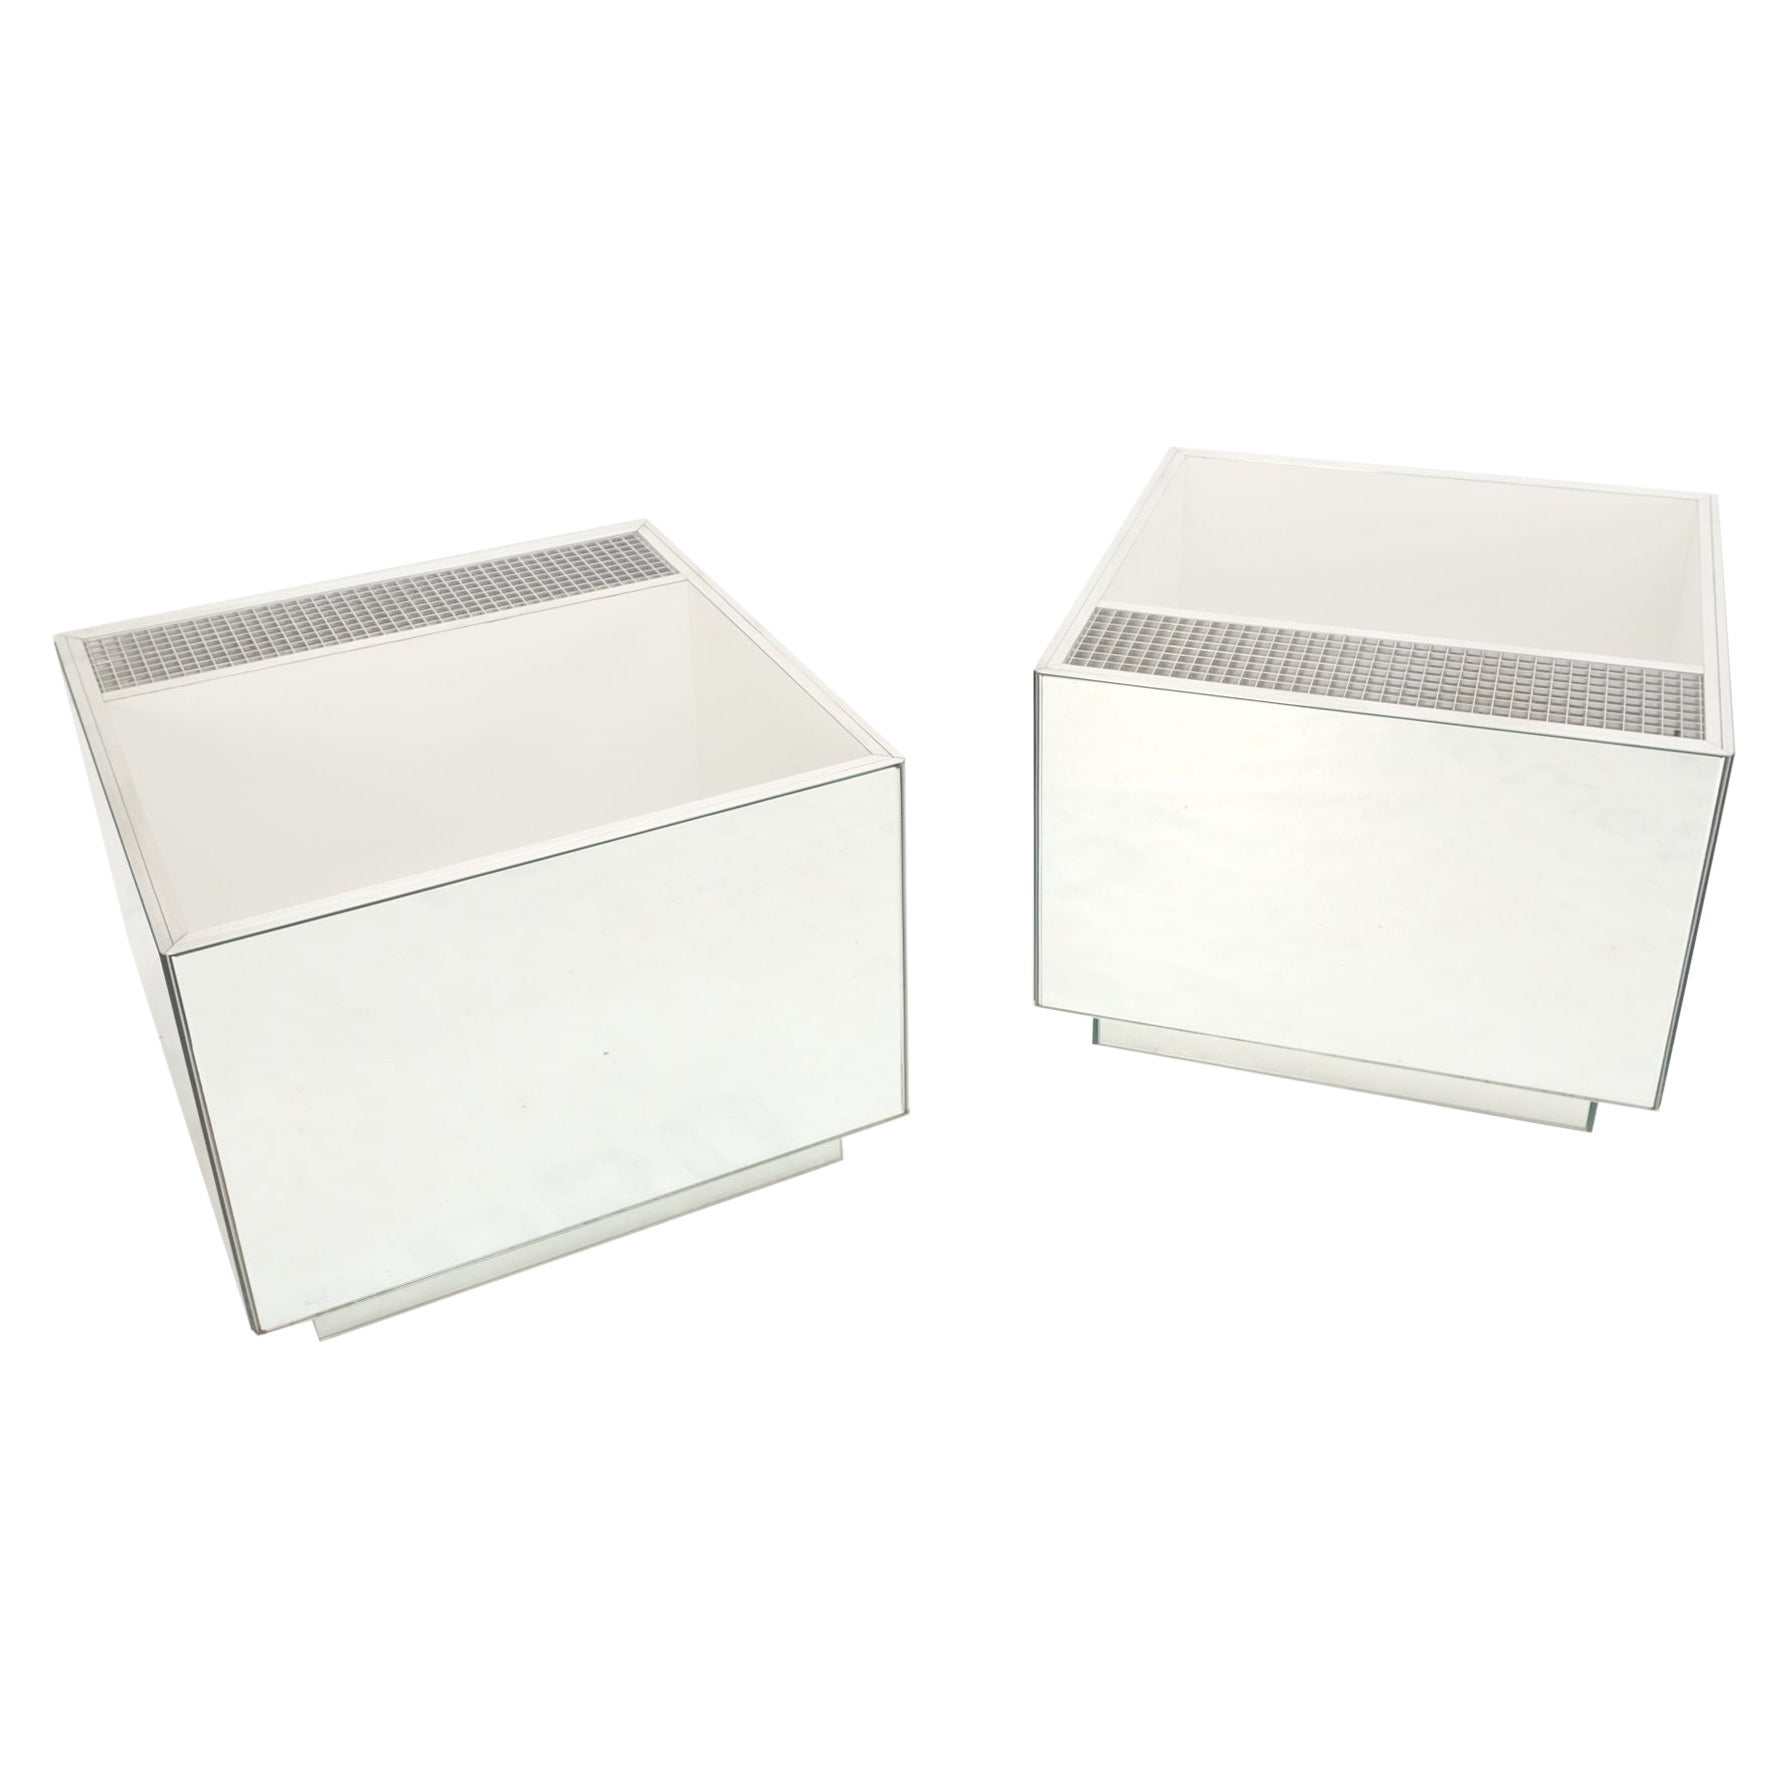 Pair of Very Fine Mirrored Box Planters Lights Stainless Steel Cases For Sale